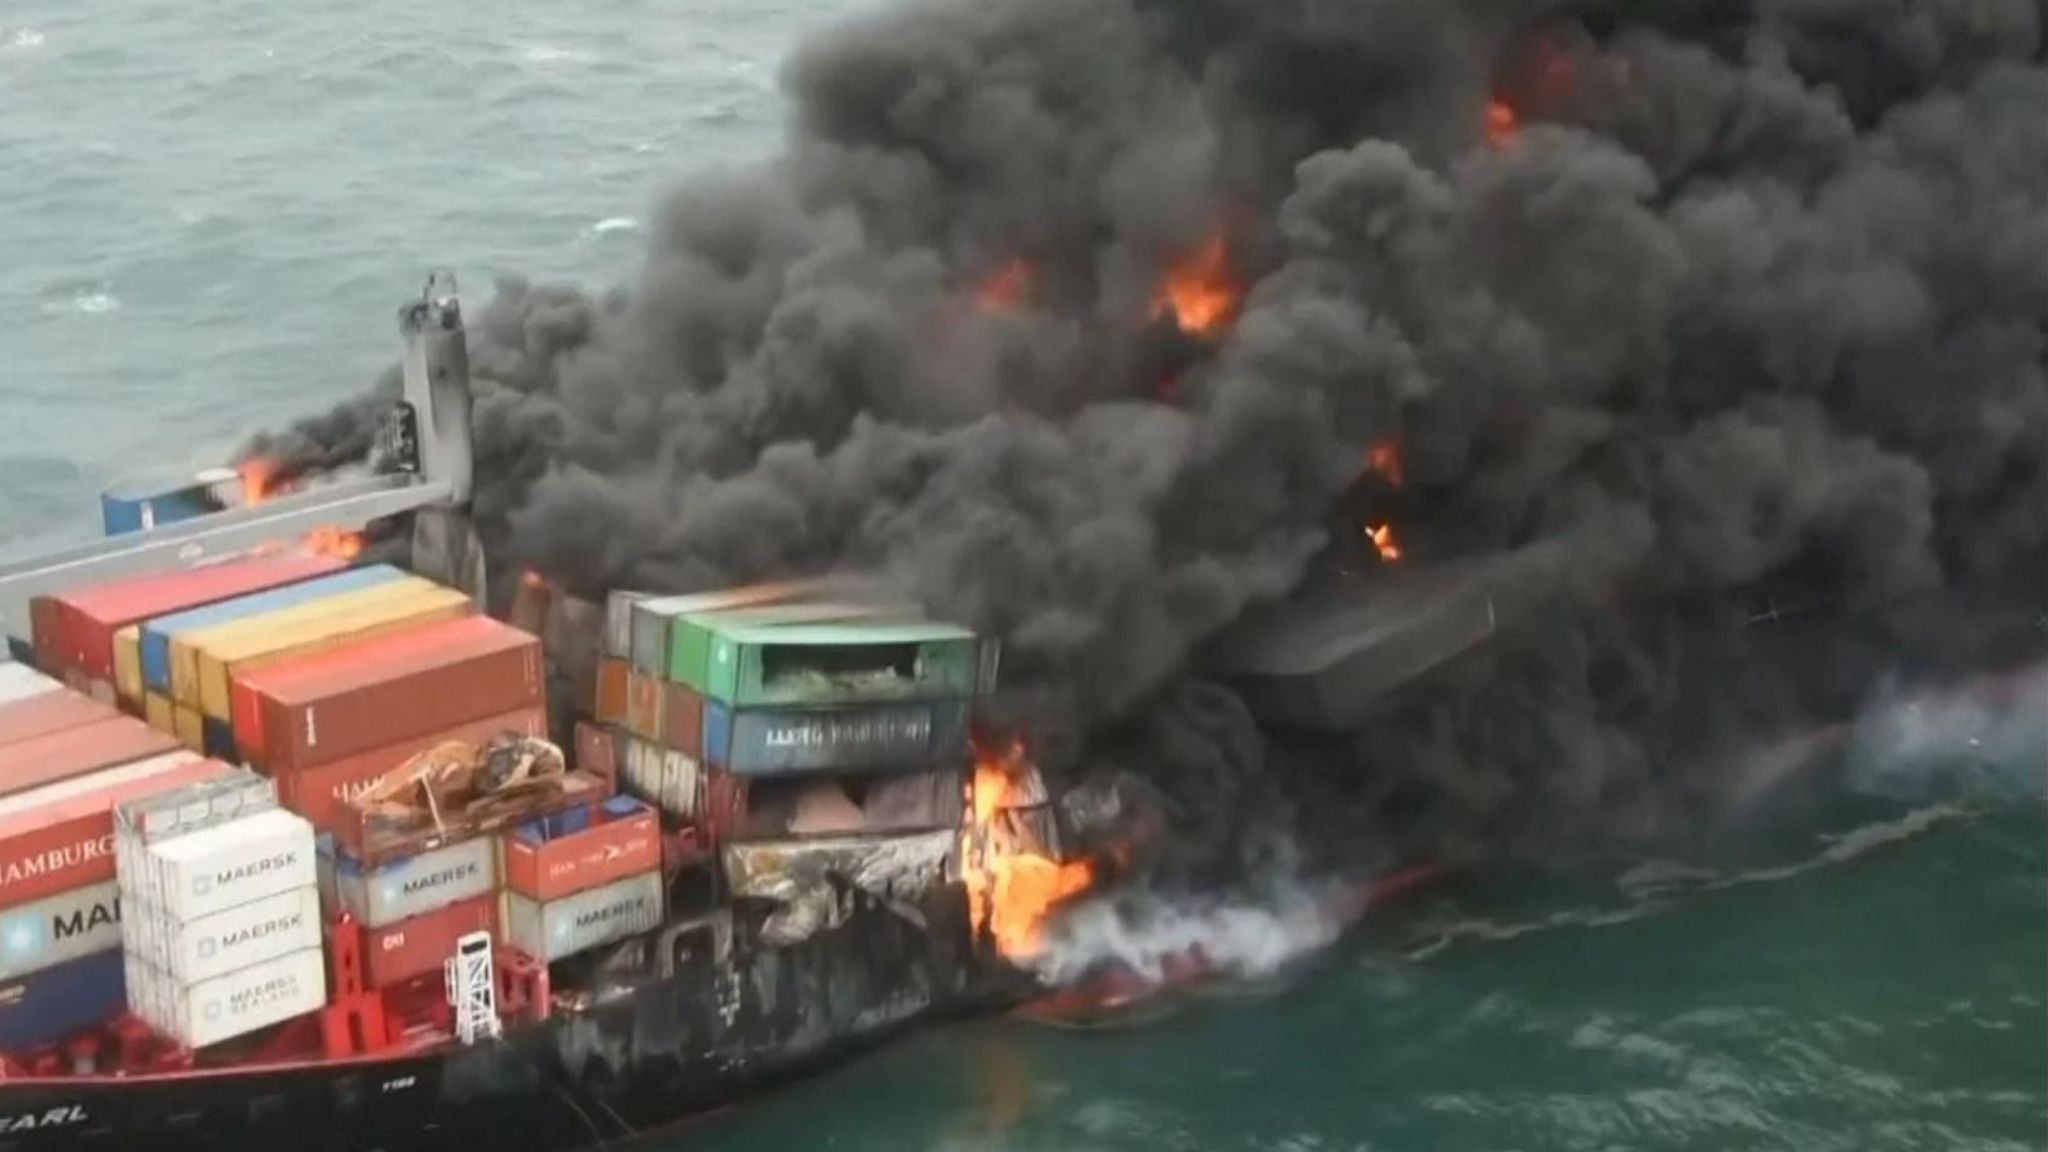 Large container ship on fire in Sri Lanka | News UK Video News | Sky News